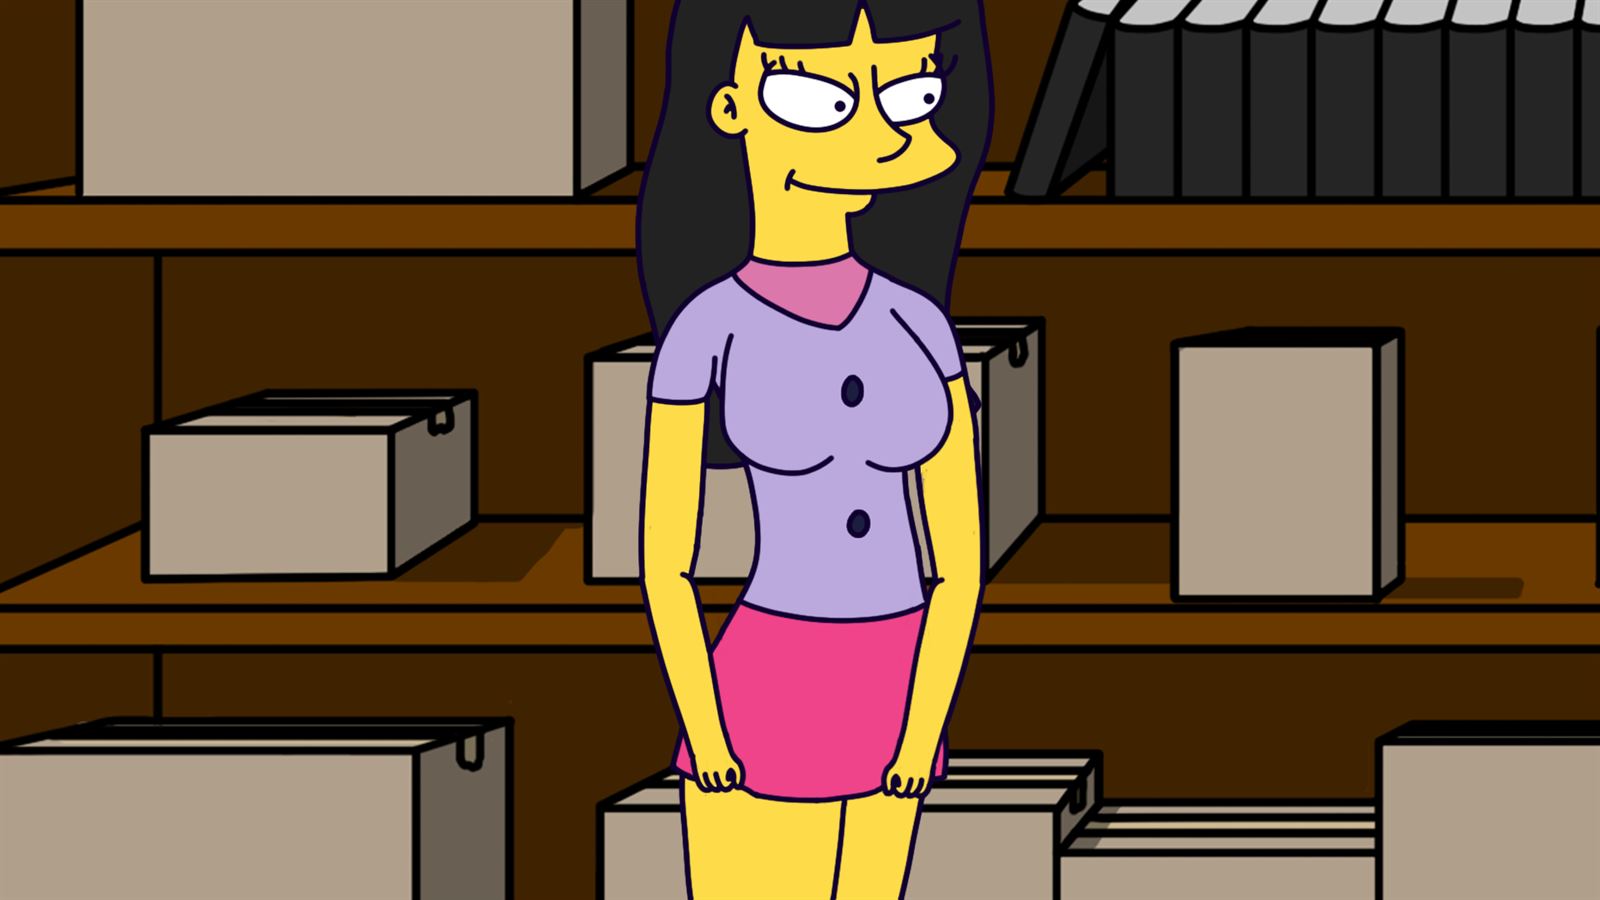 Making Fiends Porn - Ren'py] The Simpsons Simpvill - v1.03 18+ Adult xxx Porn Game Download